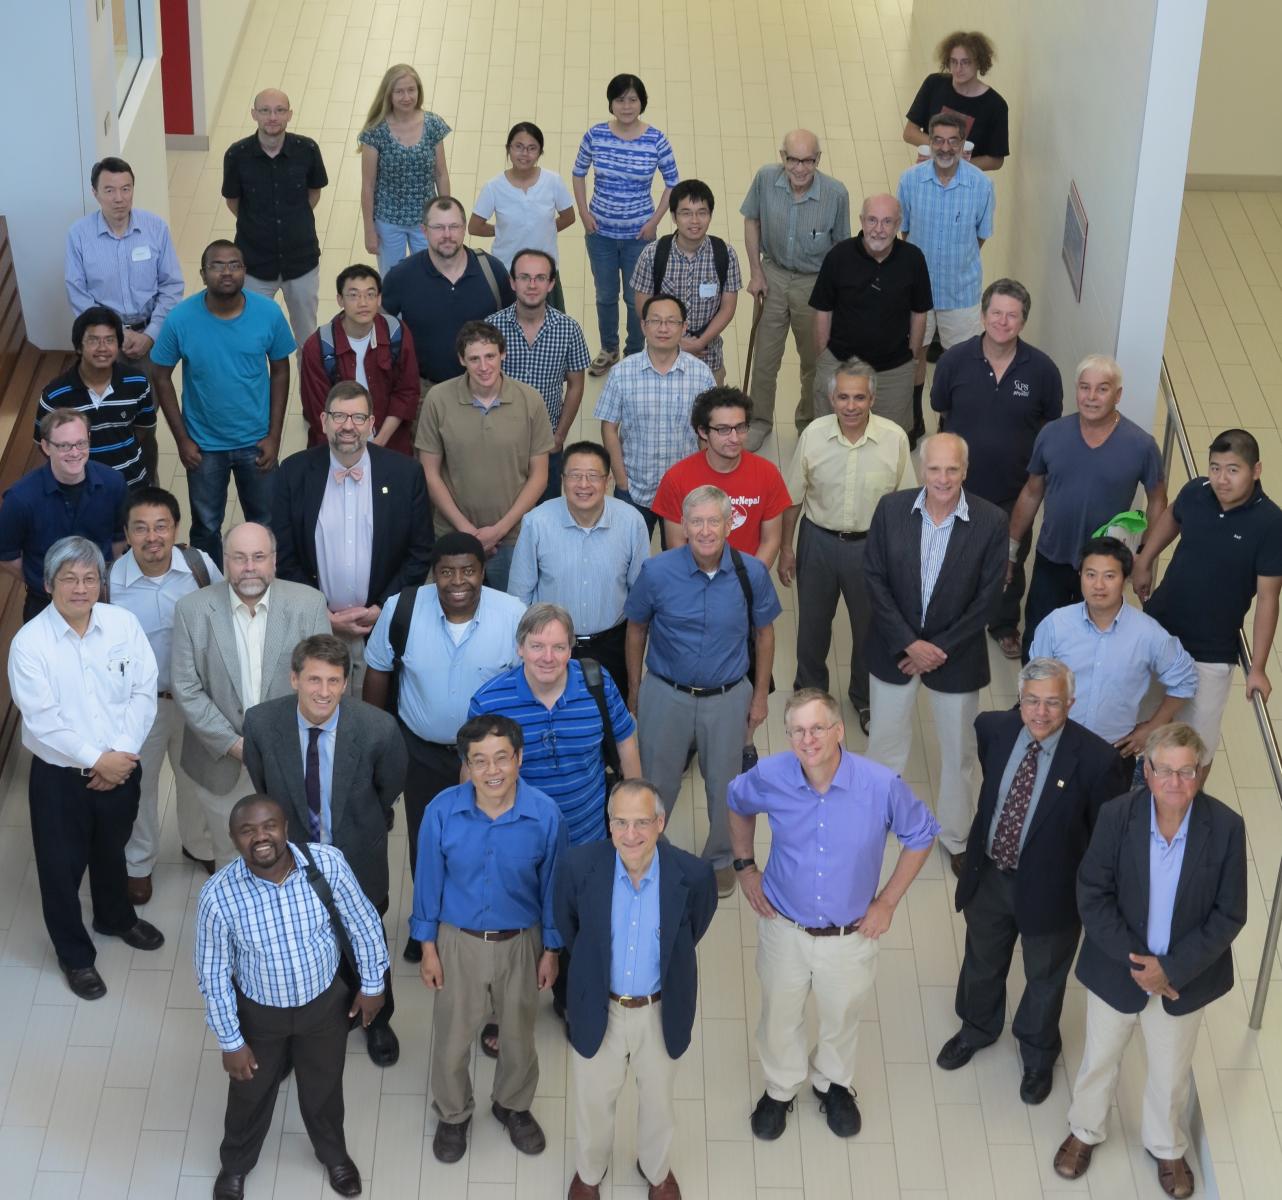 Photo Credit: Group photo of AMO Workshop attendees